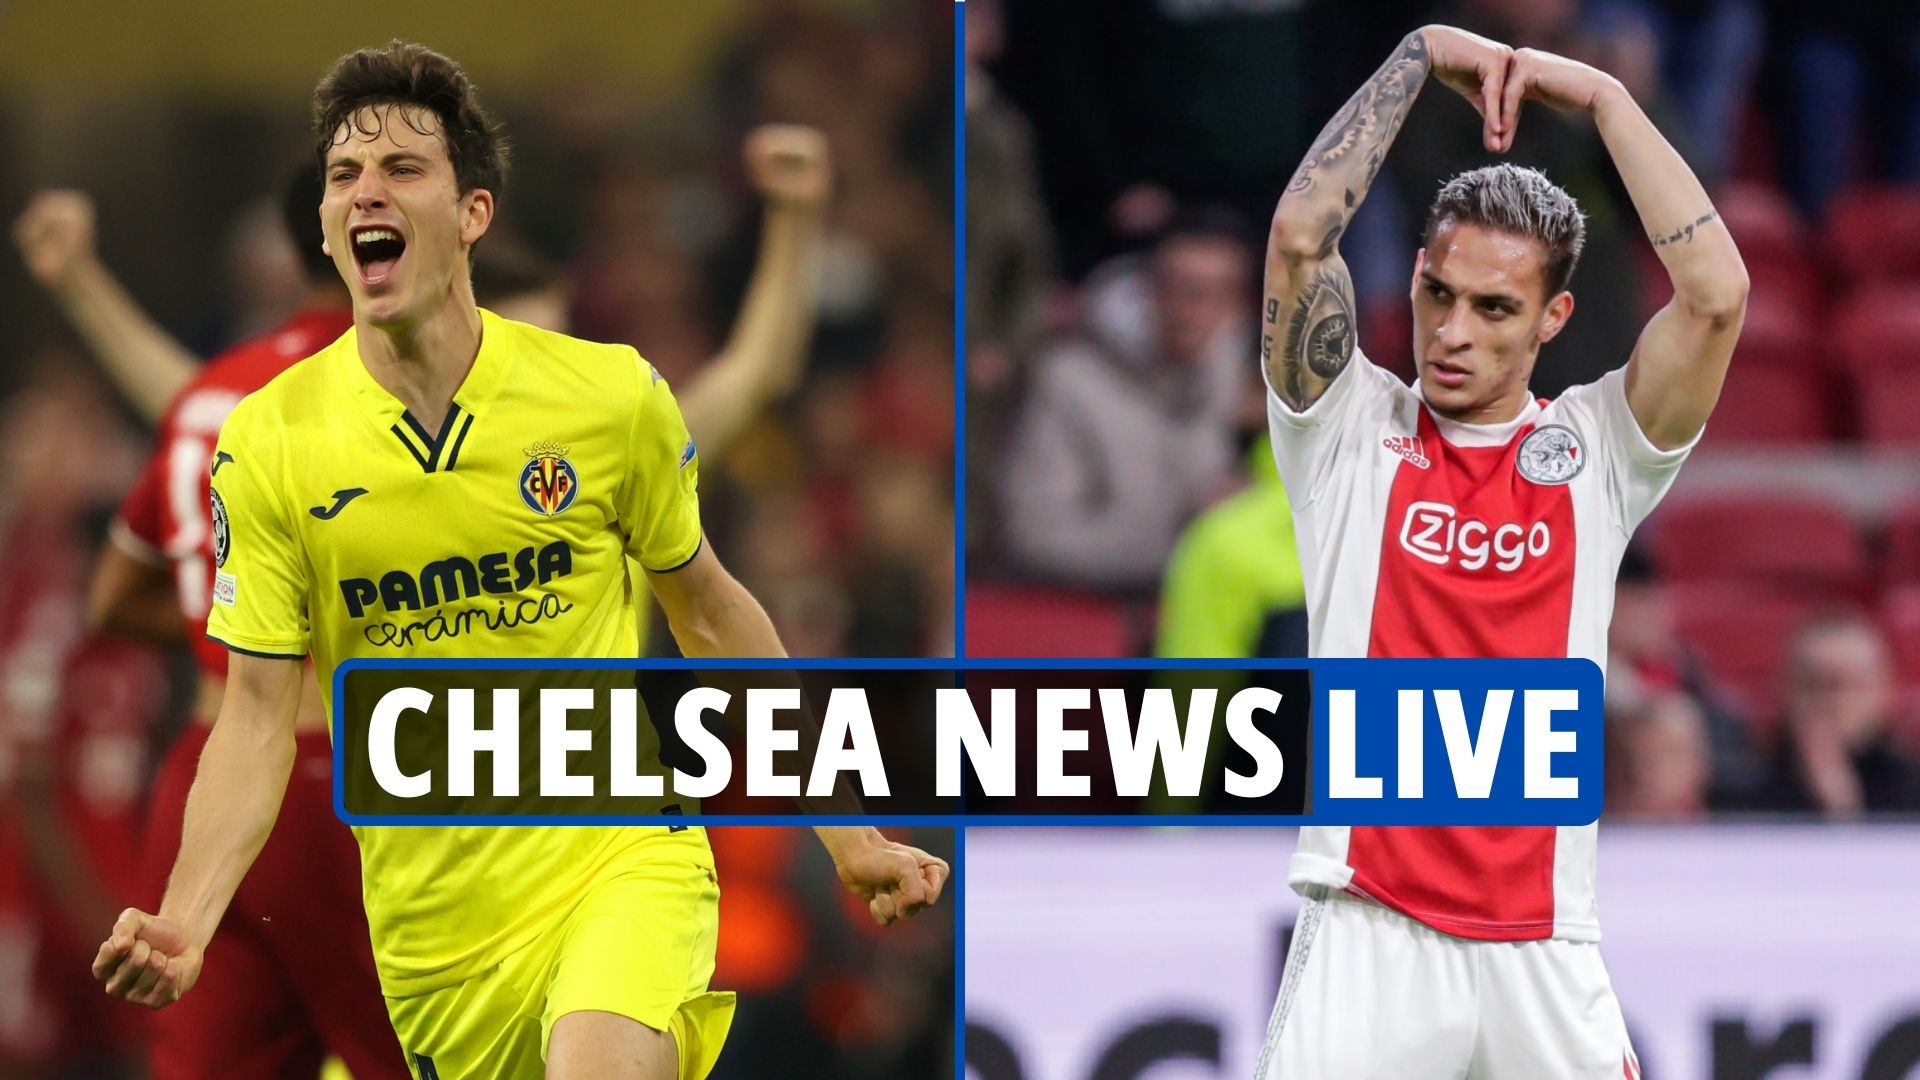 Chelsea news LIVE: latest transfer gossip and takeover news from Stamford Bridge